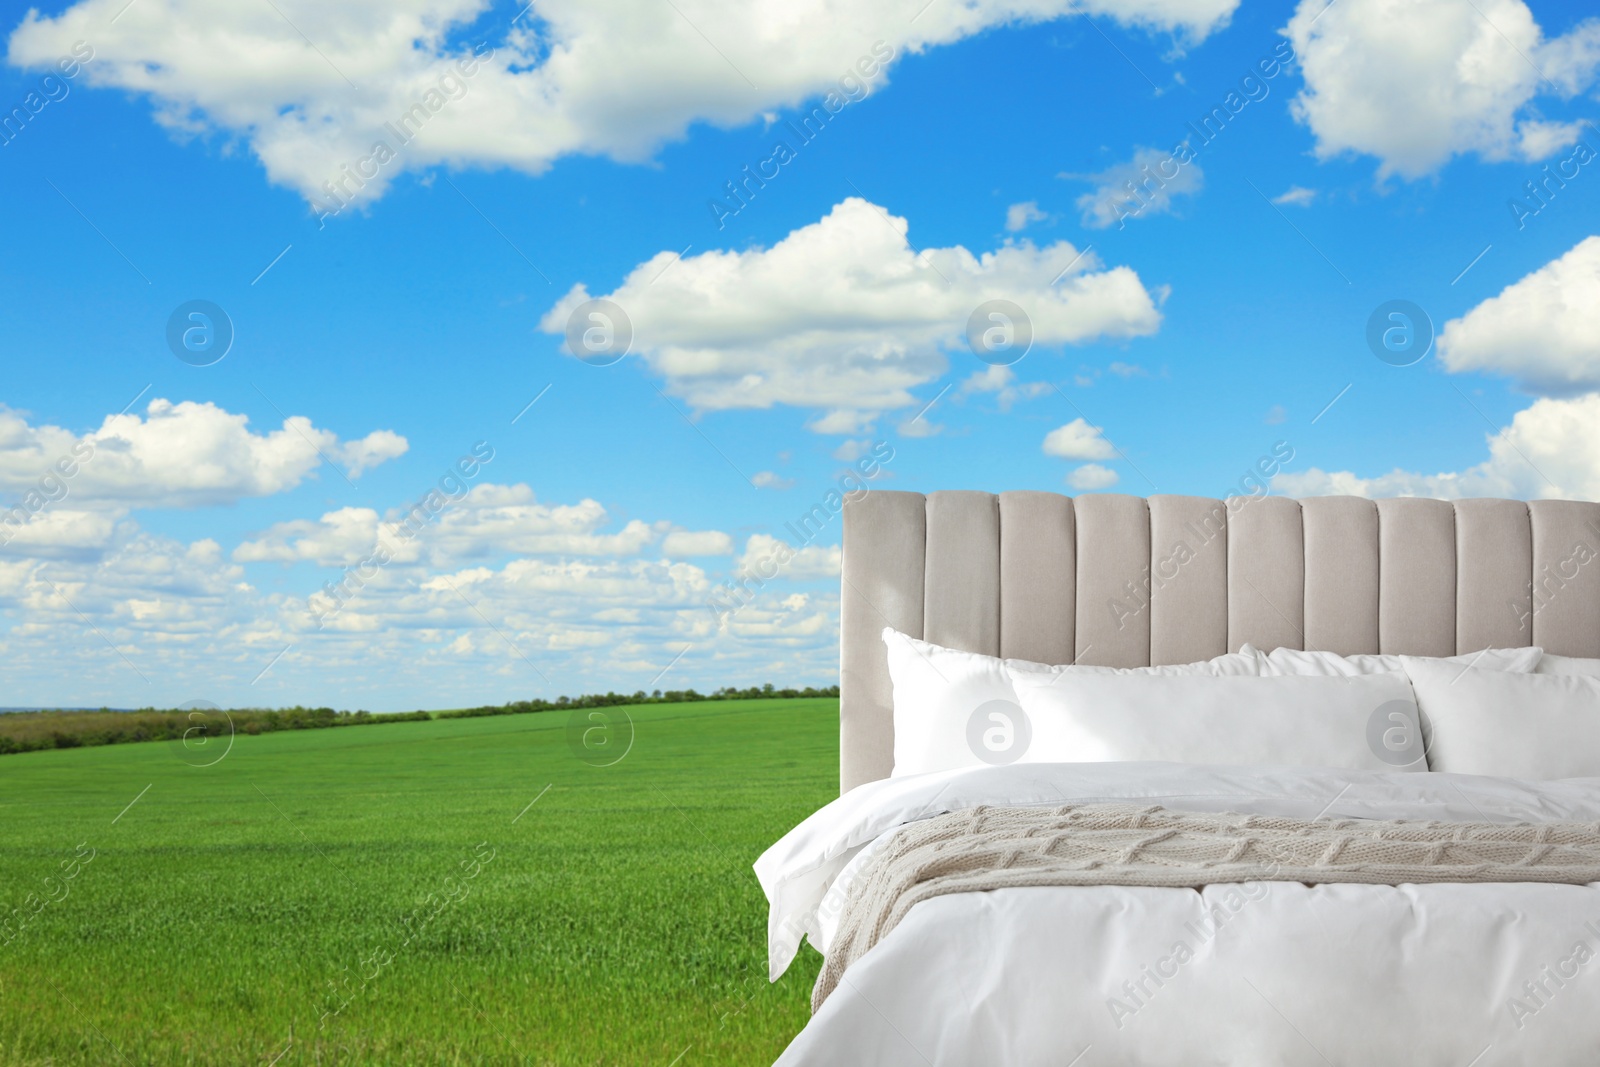 Image of Comfortable bed with soft pillows in green field on sunny day